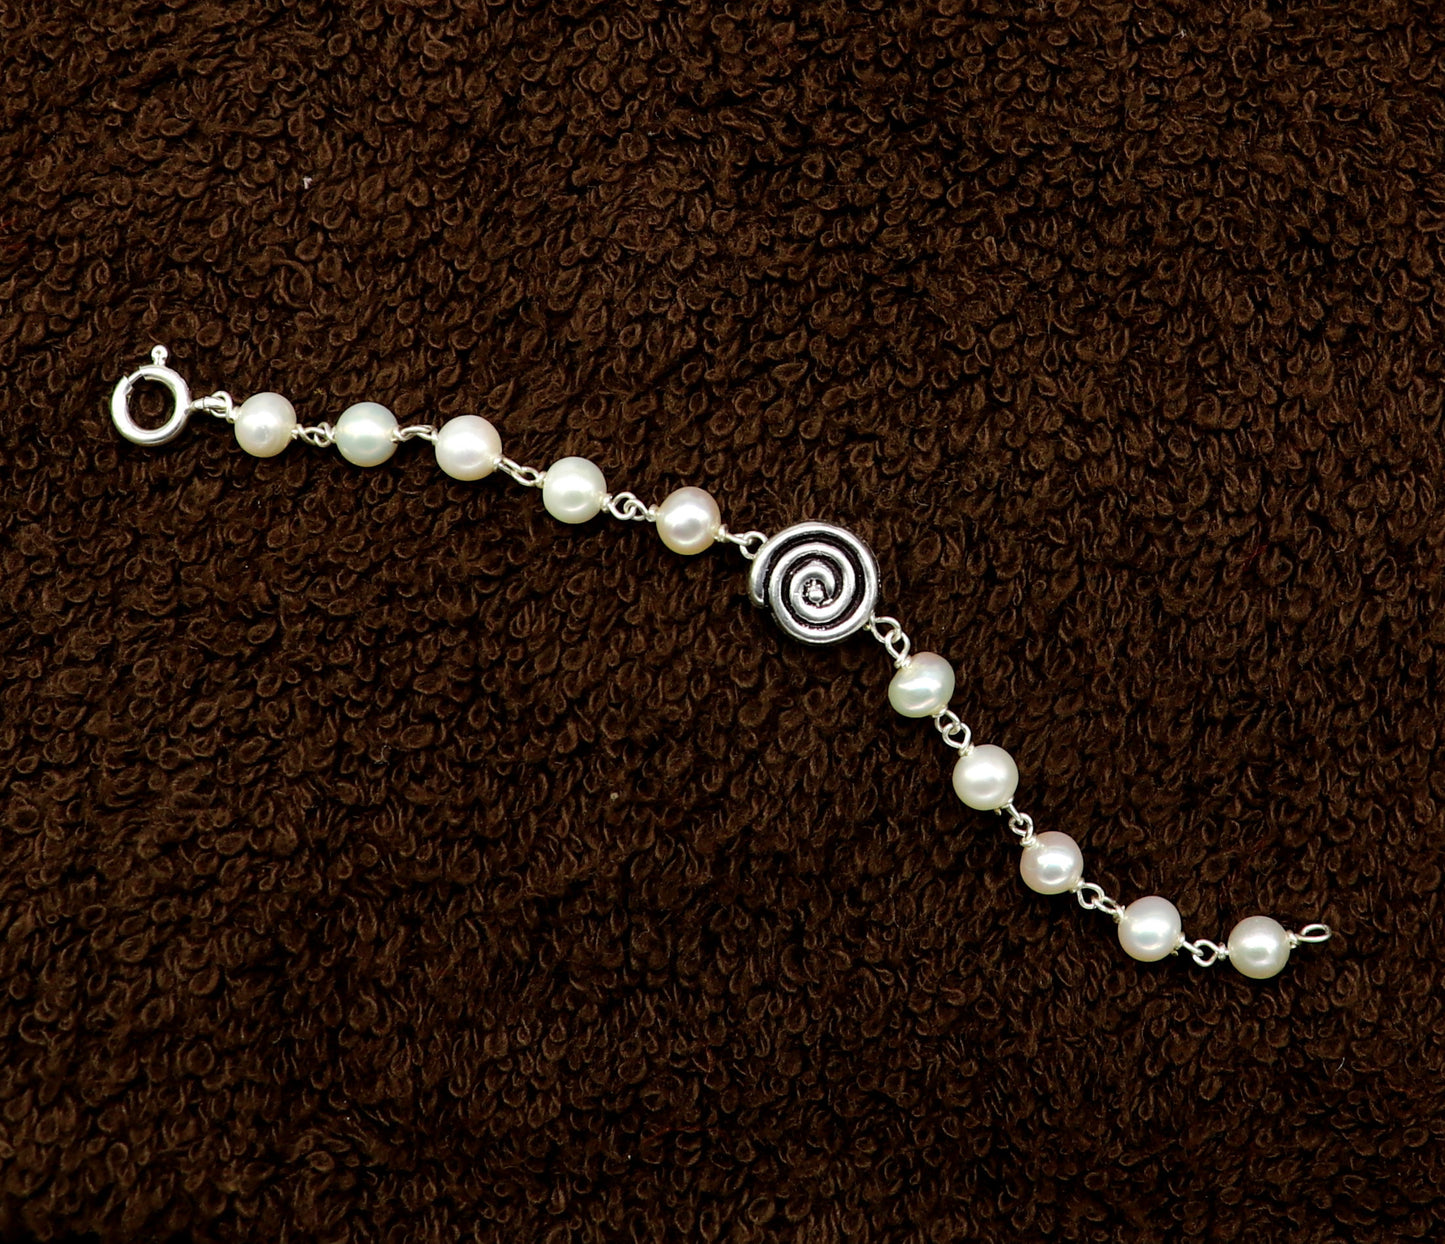 All size 925 sterling silver handmade fabulous natural white pearl beaded baby bracelet, best gift for kids bracelets jewelry bbr01 - TRIBAL ORNAMENTS